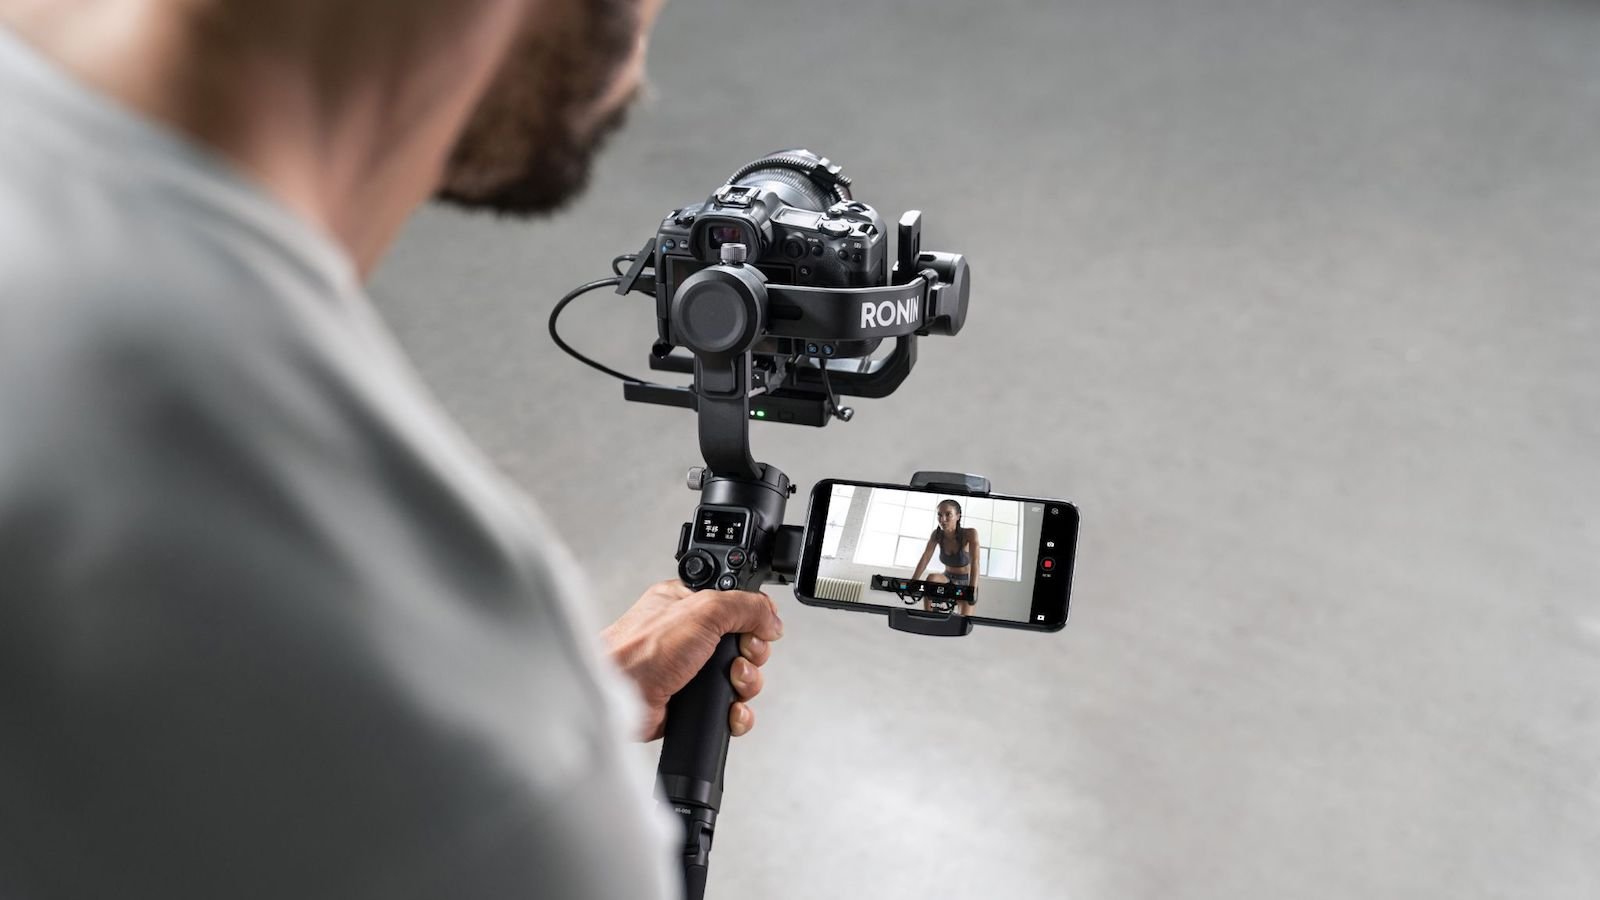 DJI RSC 2 compact camera stabilizer has a foldable design and intuitive features